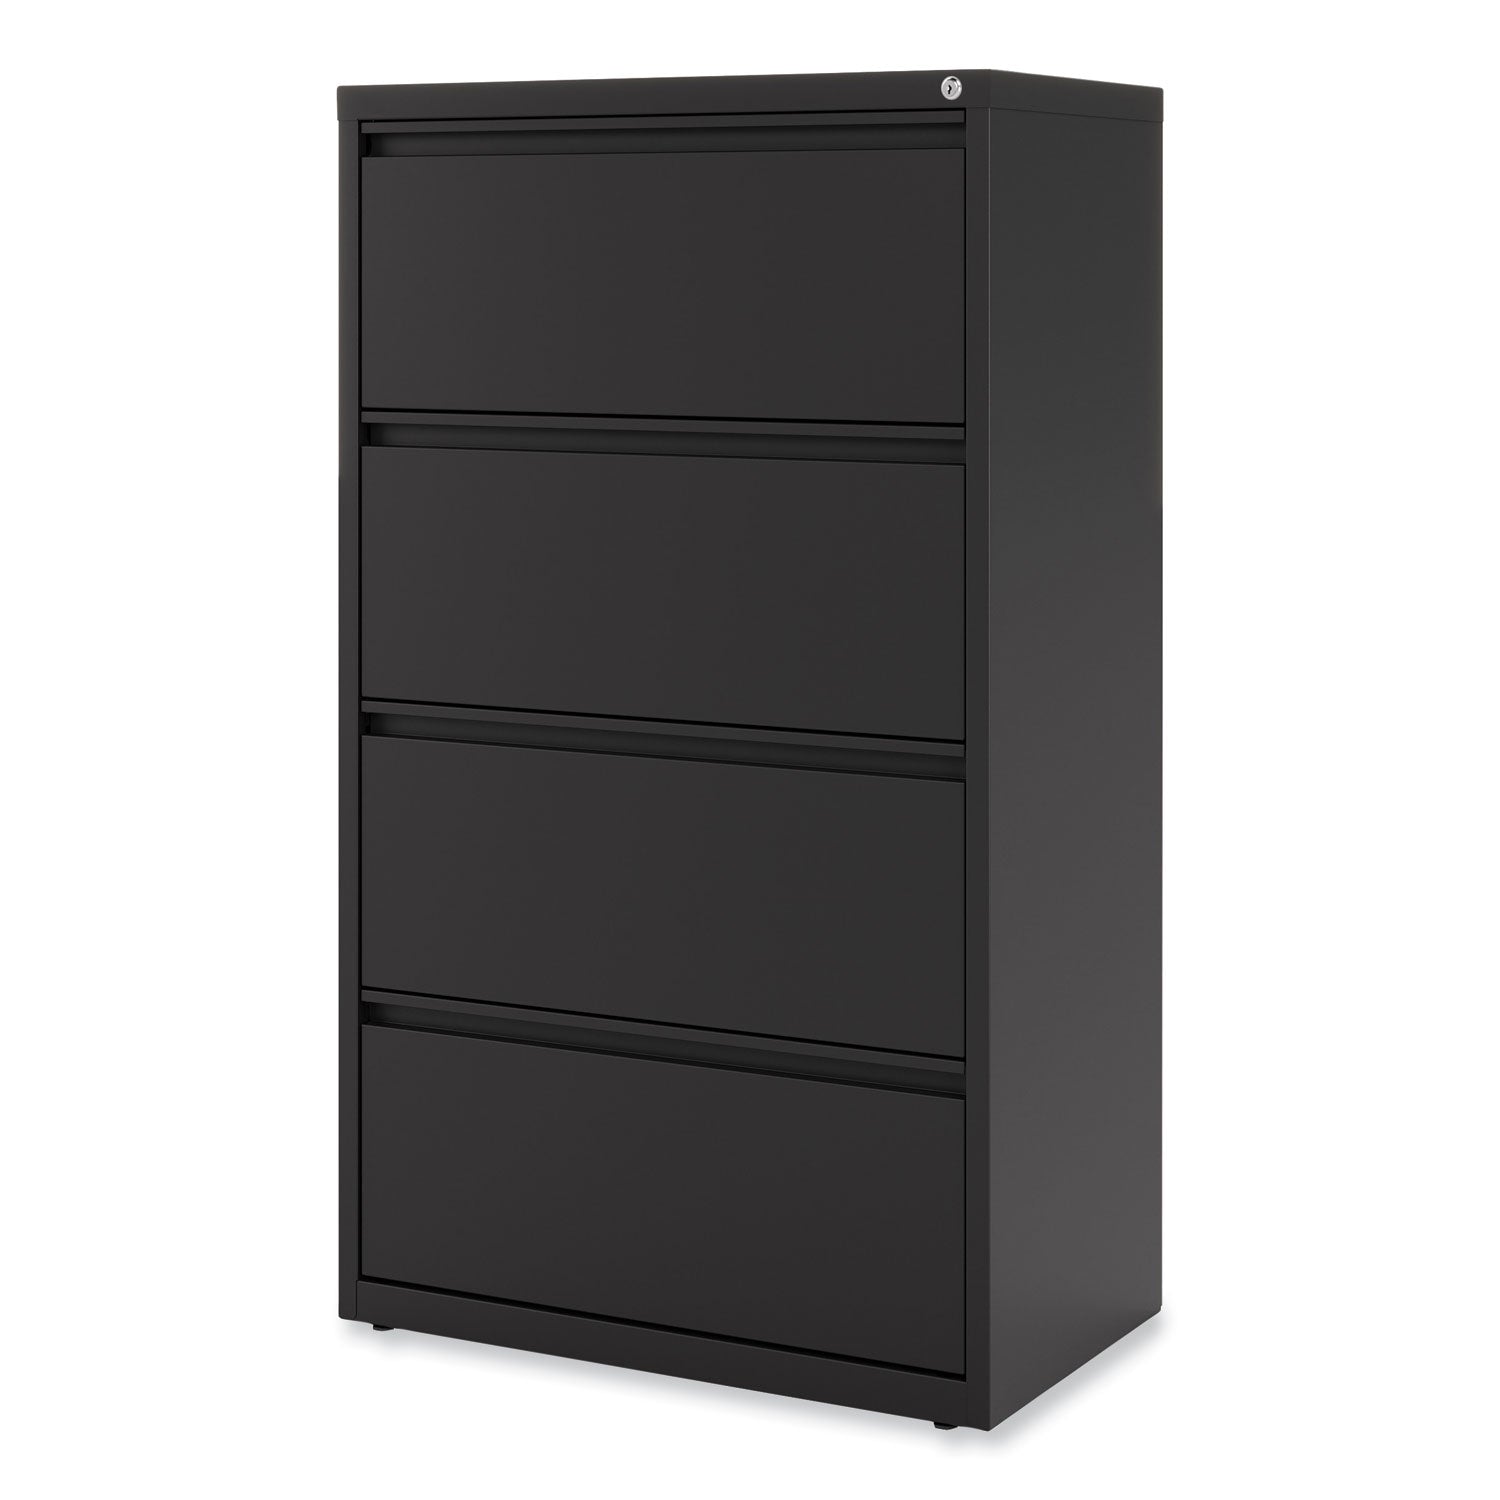 lateral-file-4-legal-letter-size-file-drawers-black-30-x-1863-x-525_alehlf3054bl - 5